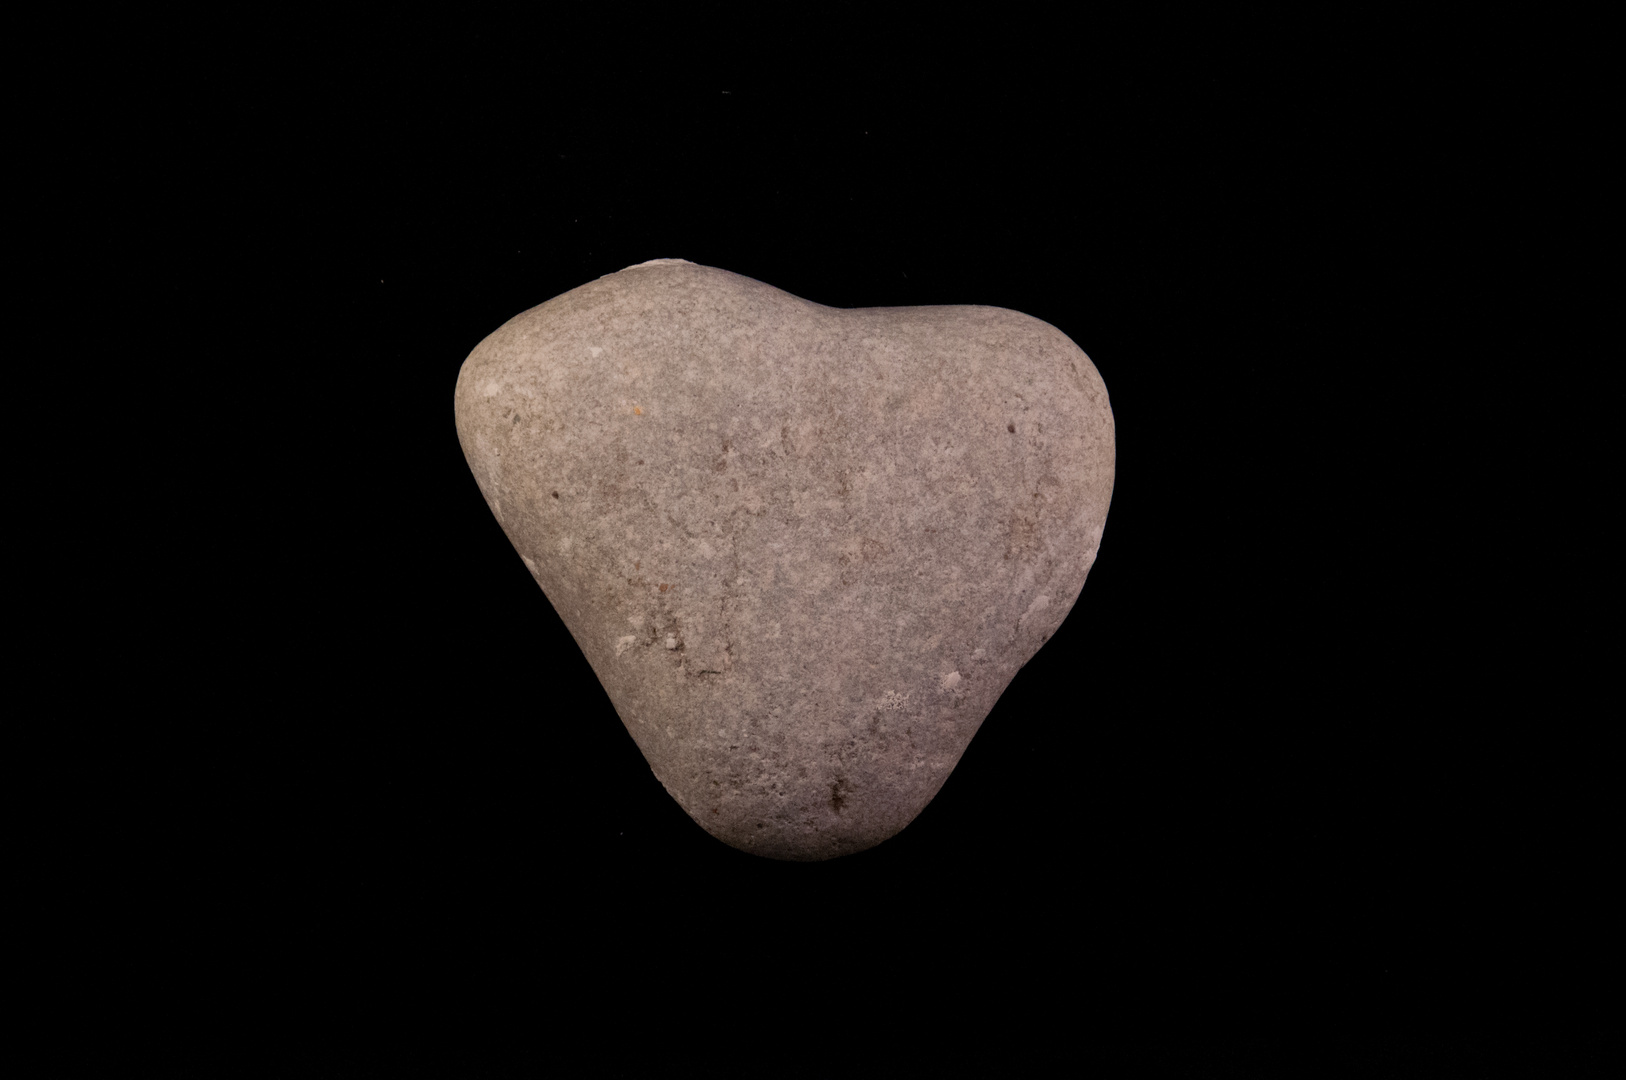 I have a hart of stone